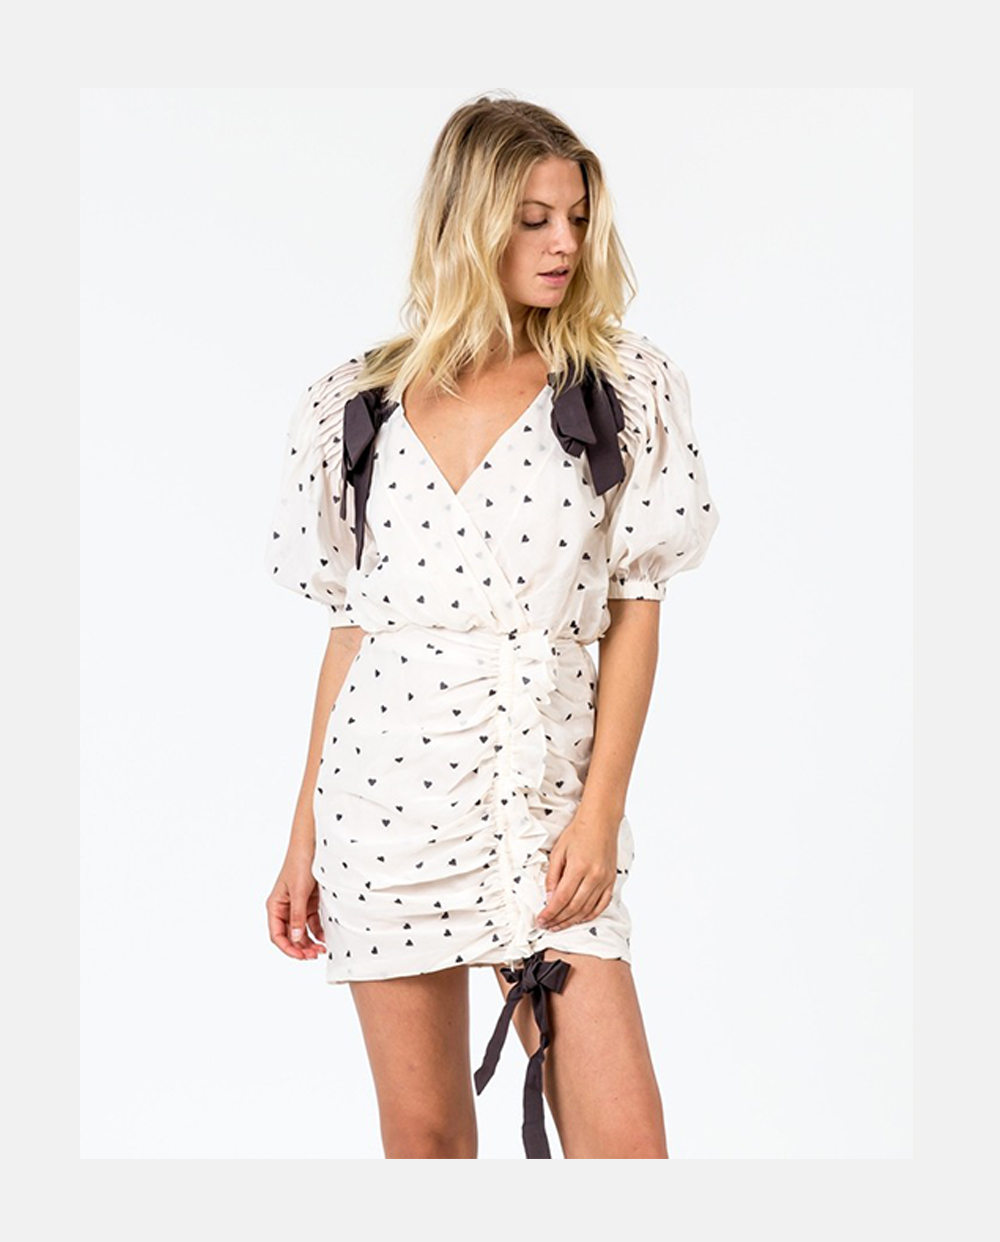 30+ Items We Can't Believe Are On Sale Right Now And We're #AddingToCart | Zimmermann Painted Heart Dress, $499 (was $899) from Superette. jpg